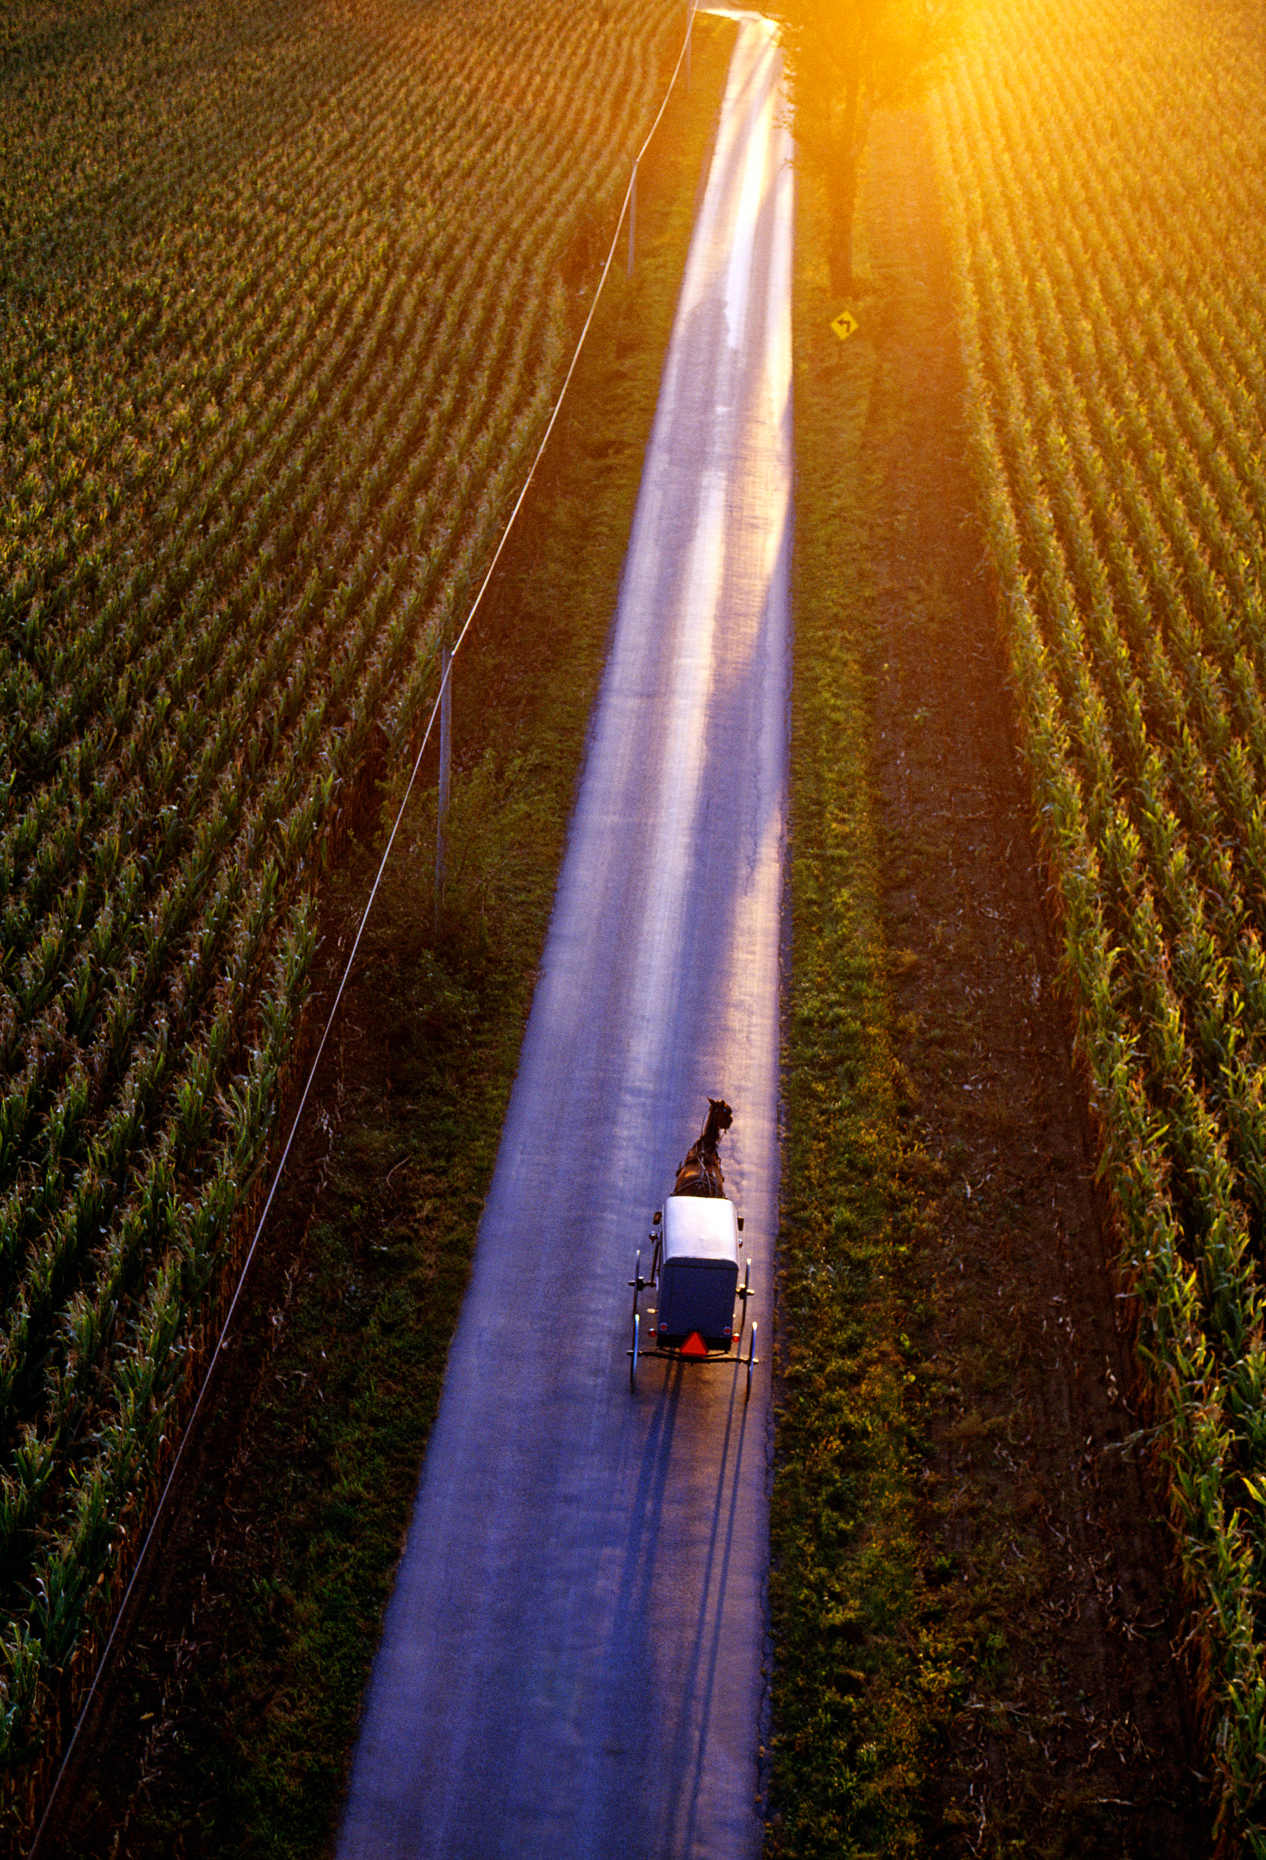 Aerial view of Amish horse drawn buggy on a rural road at sunset, Lancaster County, Pennsylvania, USA